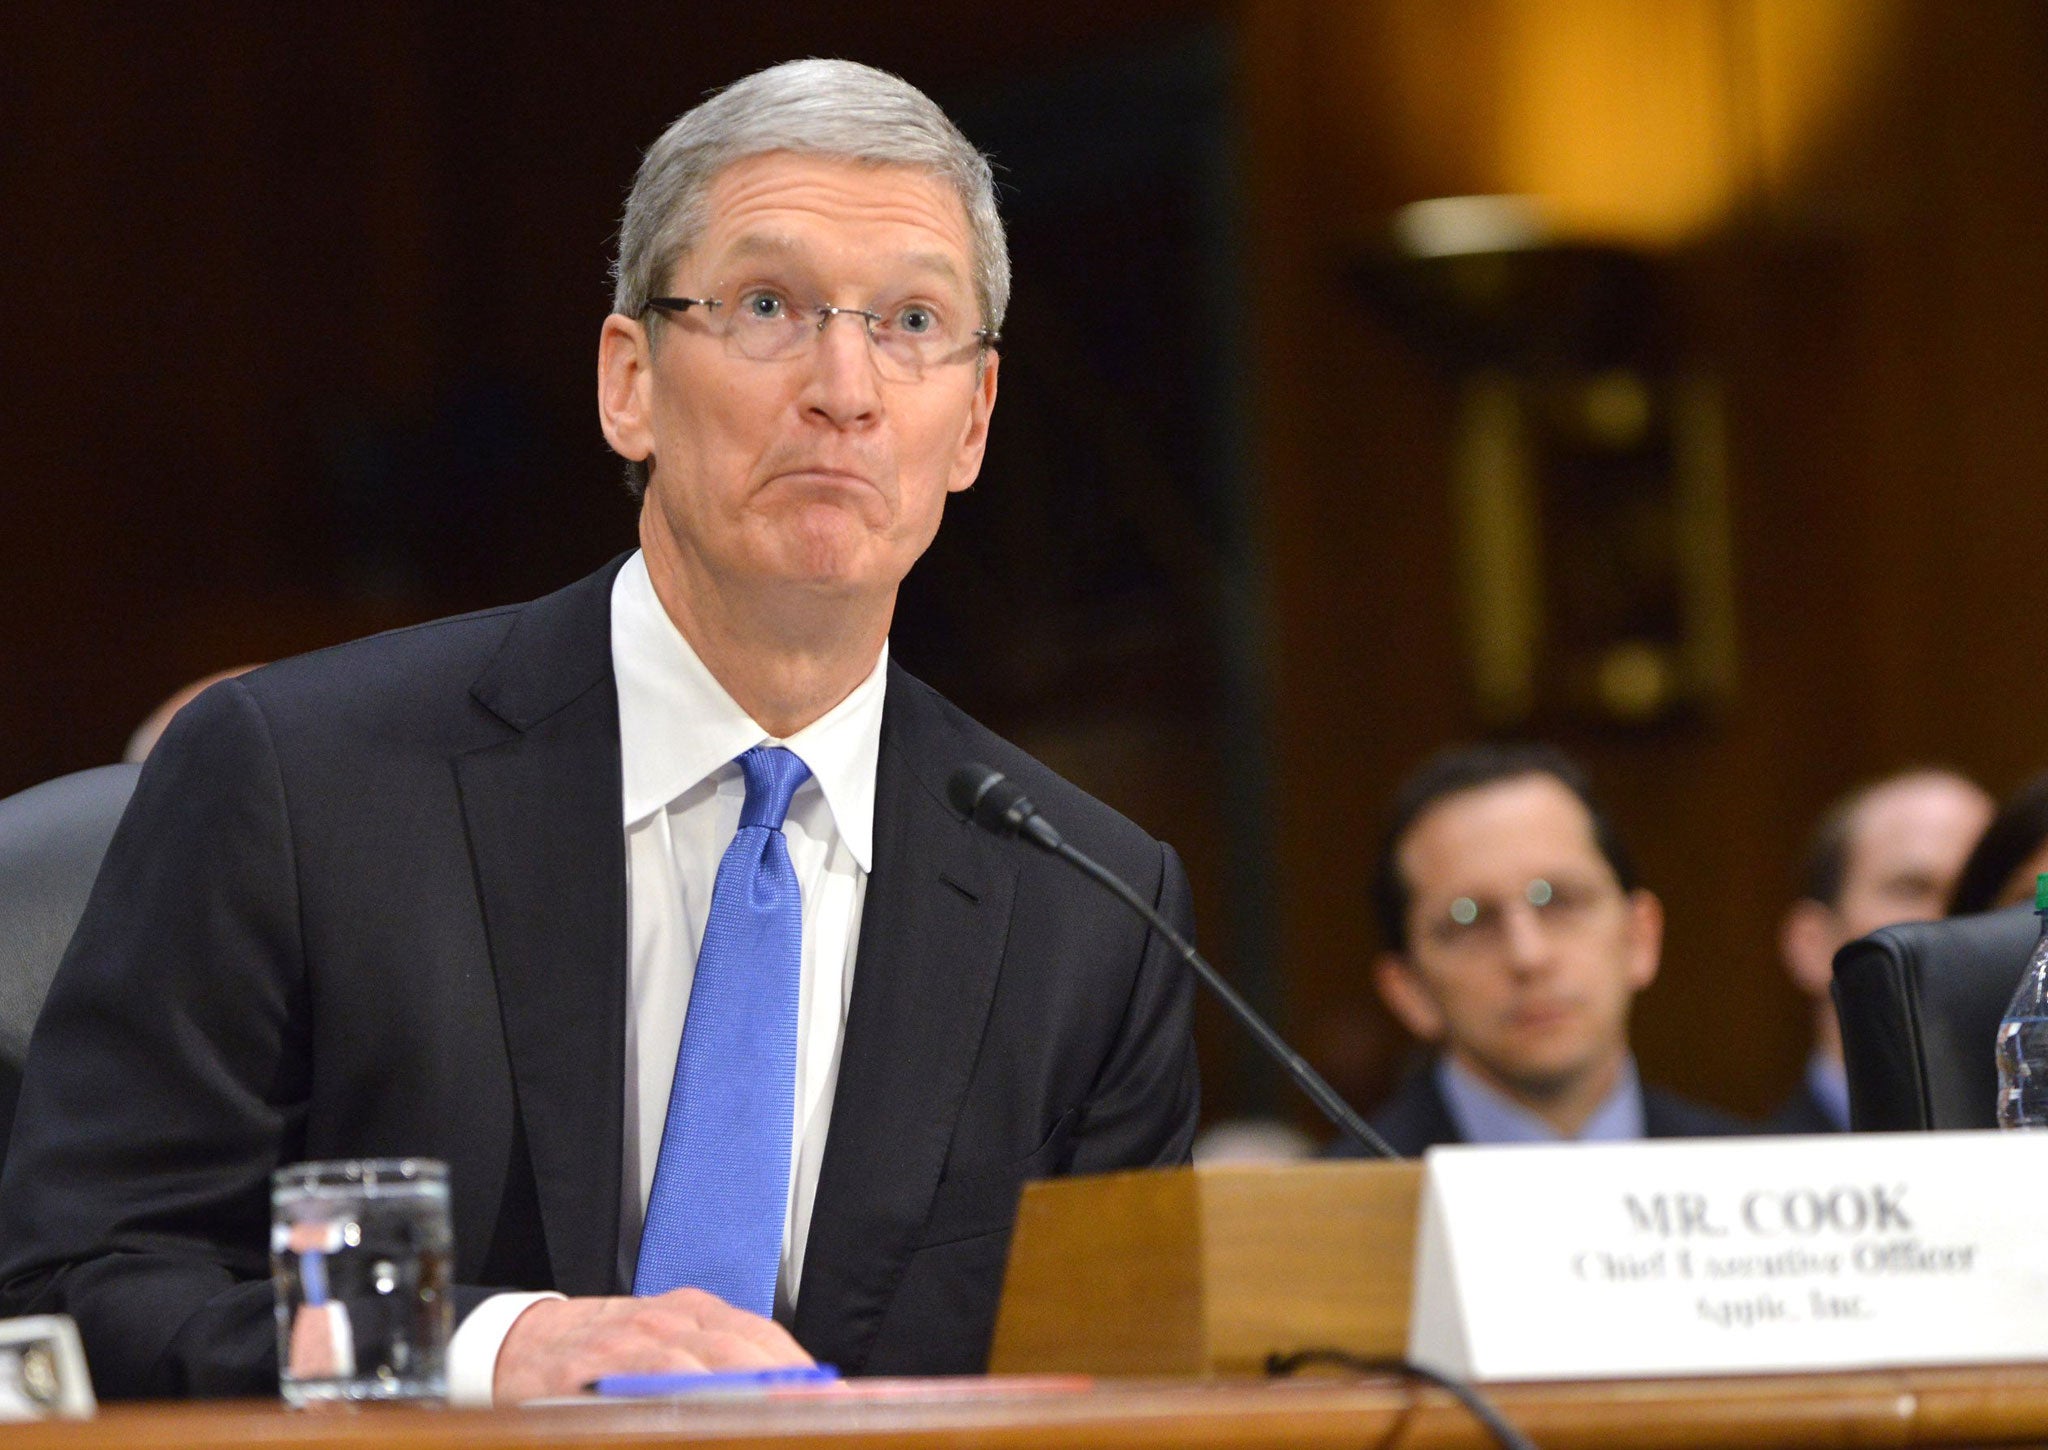 Does Tim Cook have a problem with female genitalia?